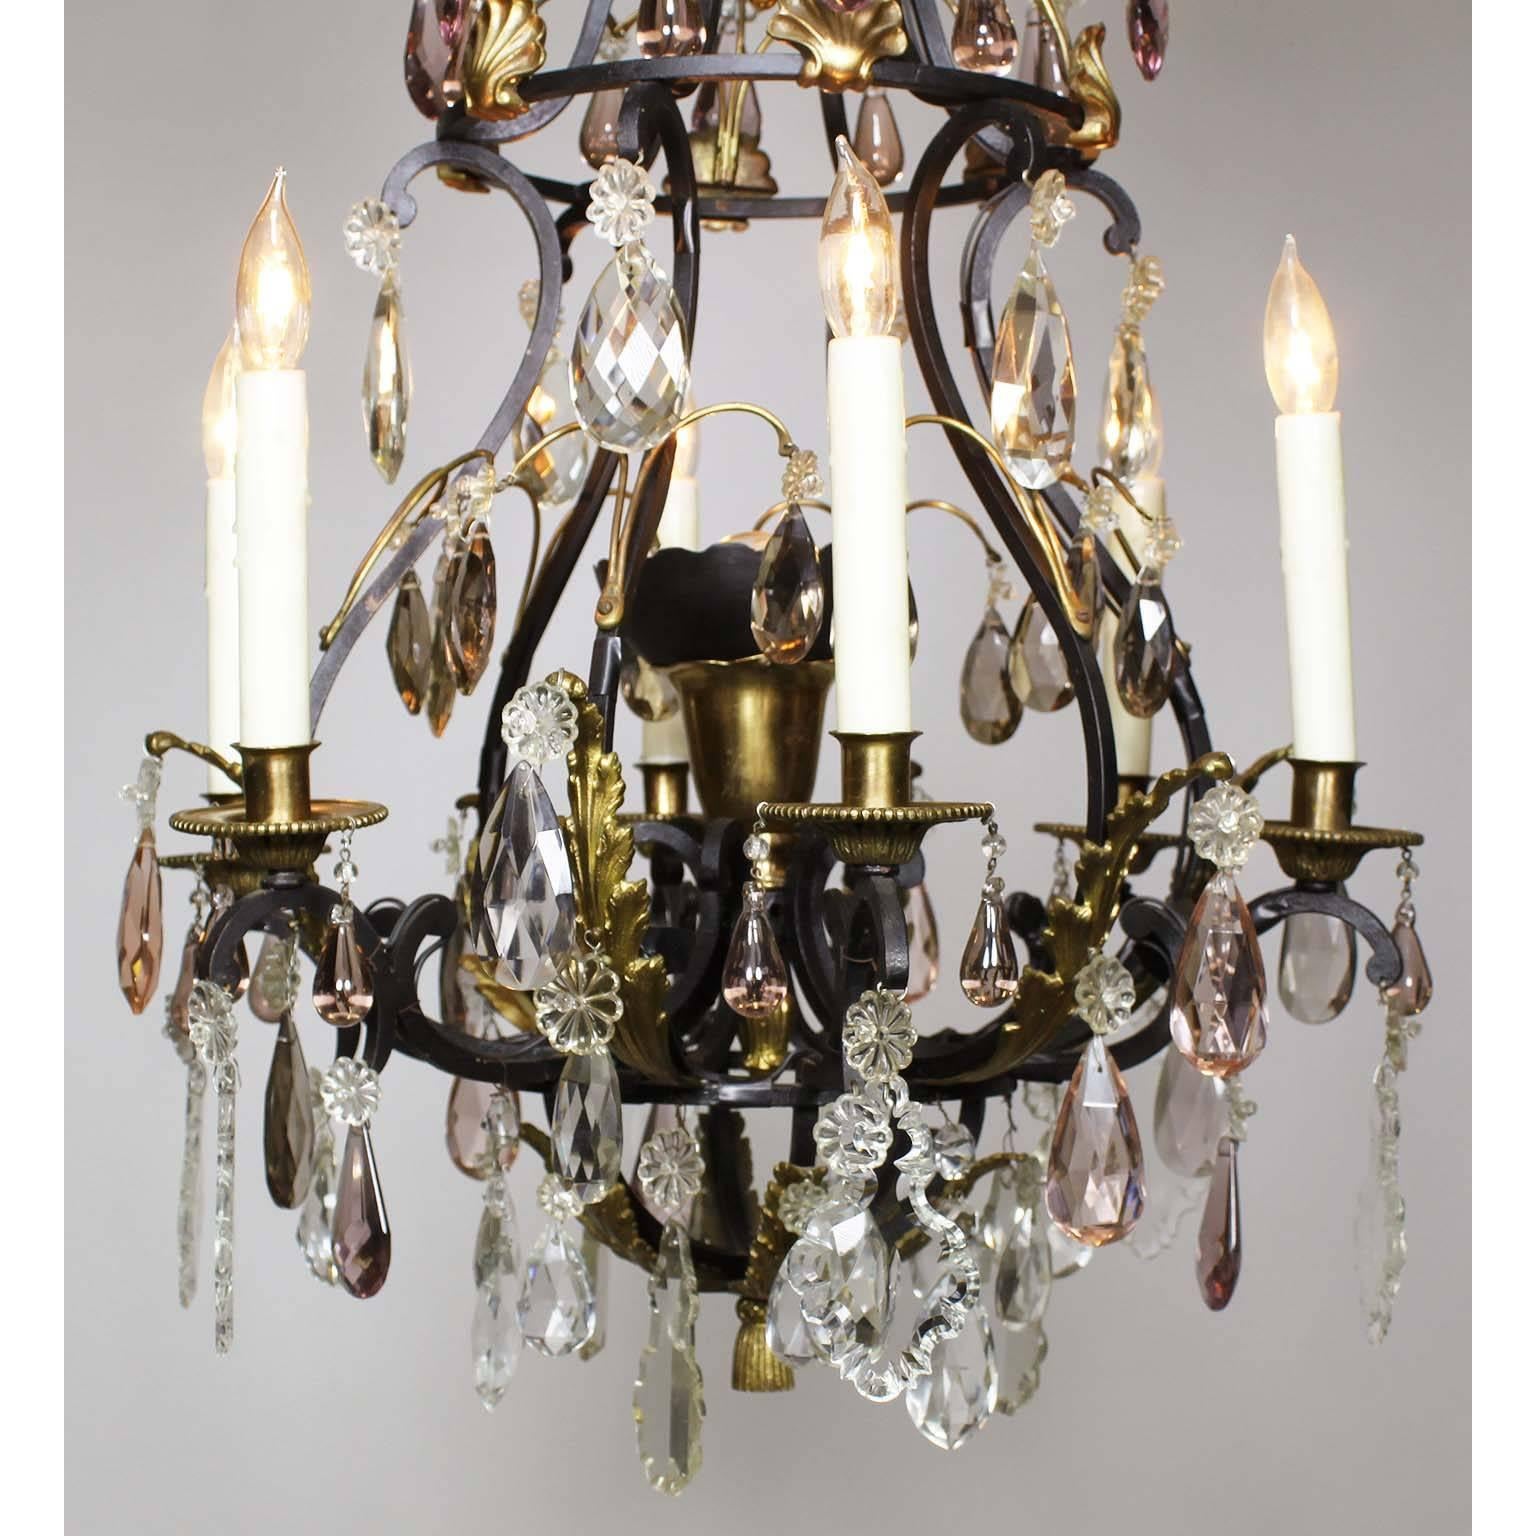 French 19th-20th Century Louis XV Style Wrought Iron & Bronze Crystal Chandelier In Good Condition For Sale In Los Angeles, CA